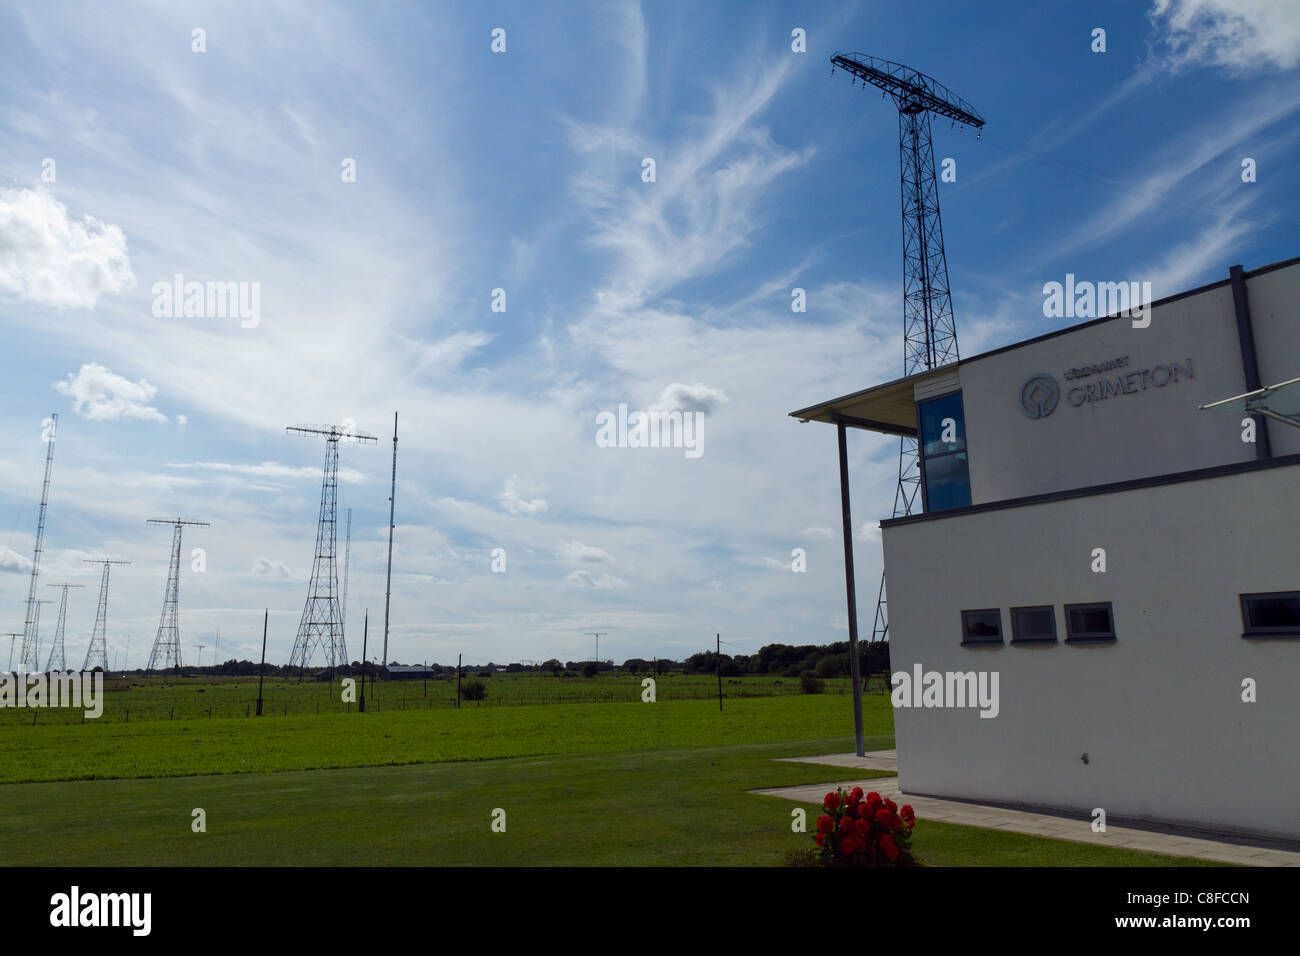 The Grimeton radio station, a UNESCO world heritage site outside Varberg in Sweden Stock Photo